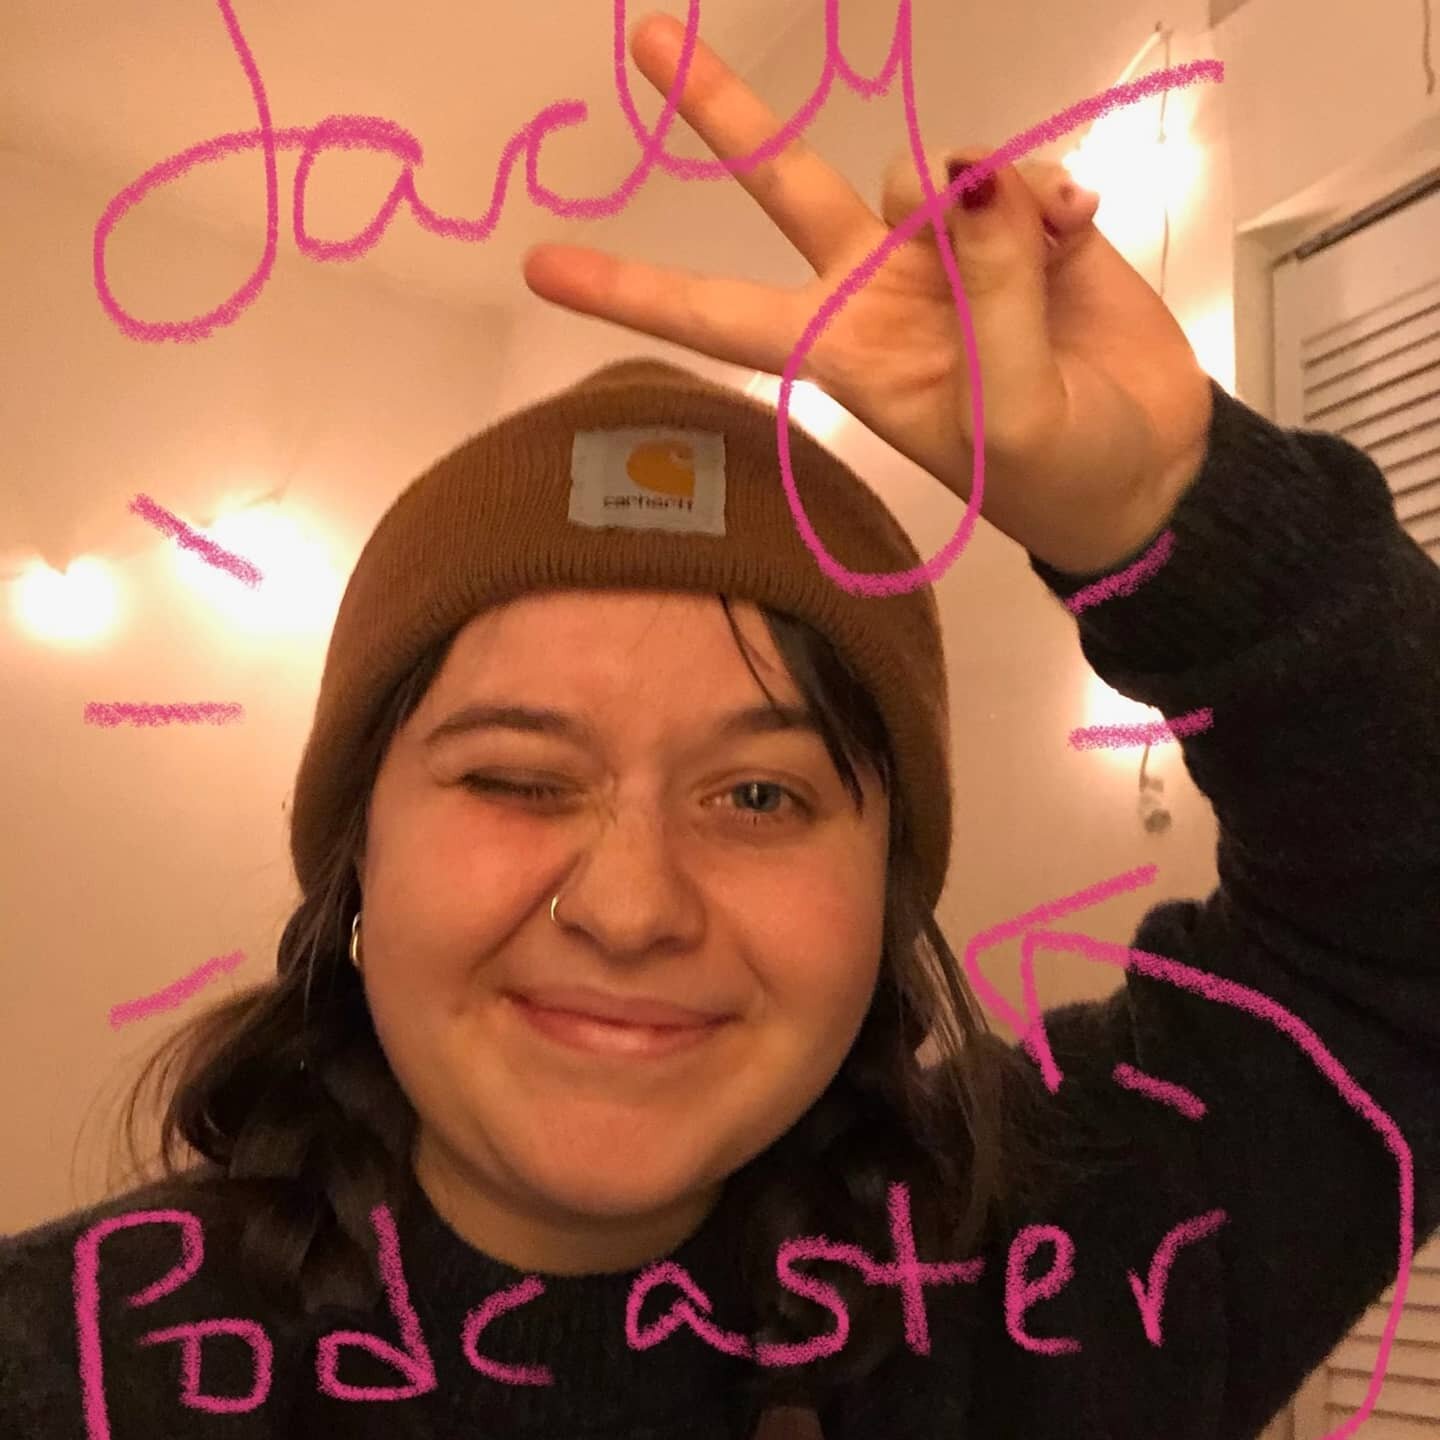 Big shout out to our girl @sarahbeidatsch!! She's such a powerful force in our podcast space and we wanna send her all the good Vibes for #internationalwomensday. Which should be erryday tbh. 
.
.
.
.
.
#womensday #womensday2021 #ladypodcaster #girls